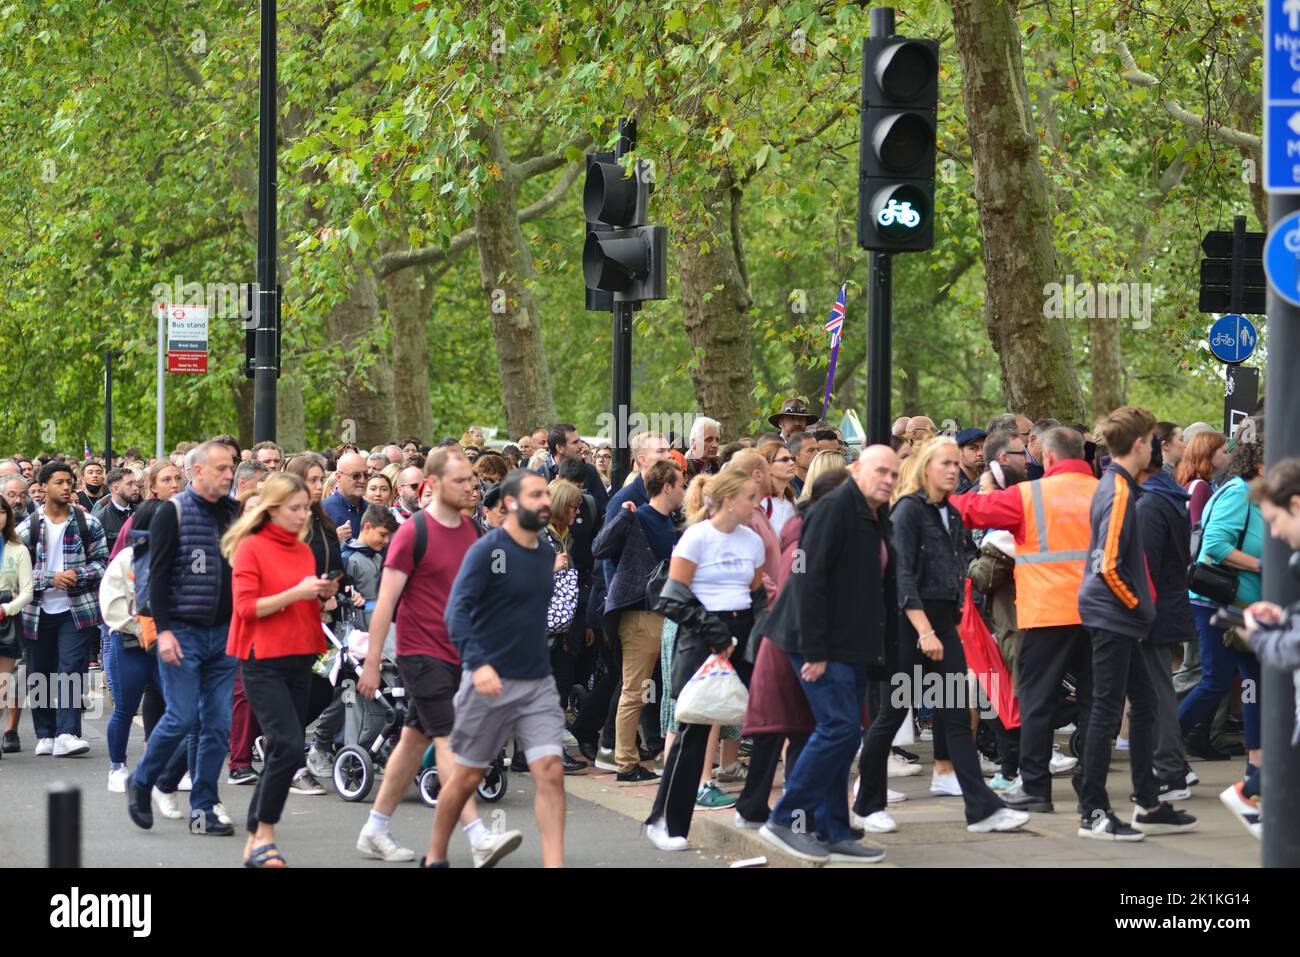 State funeral of Her Majesty Queen Elizabeth II, London, UK, Monday 19th September 2022. Crowds of people pouring into Hyde Park from Park Lane to watch the public screening on big screens. Stock Photo